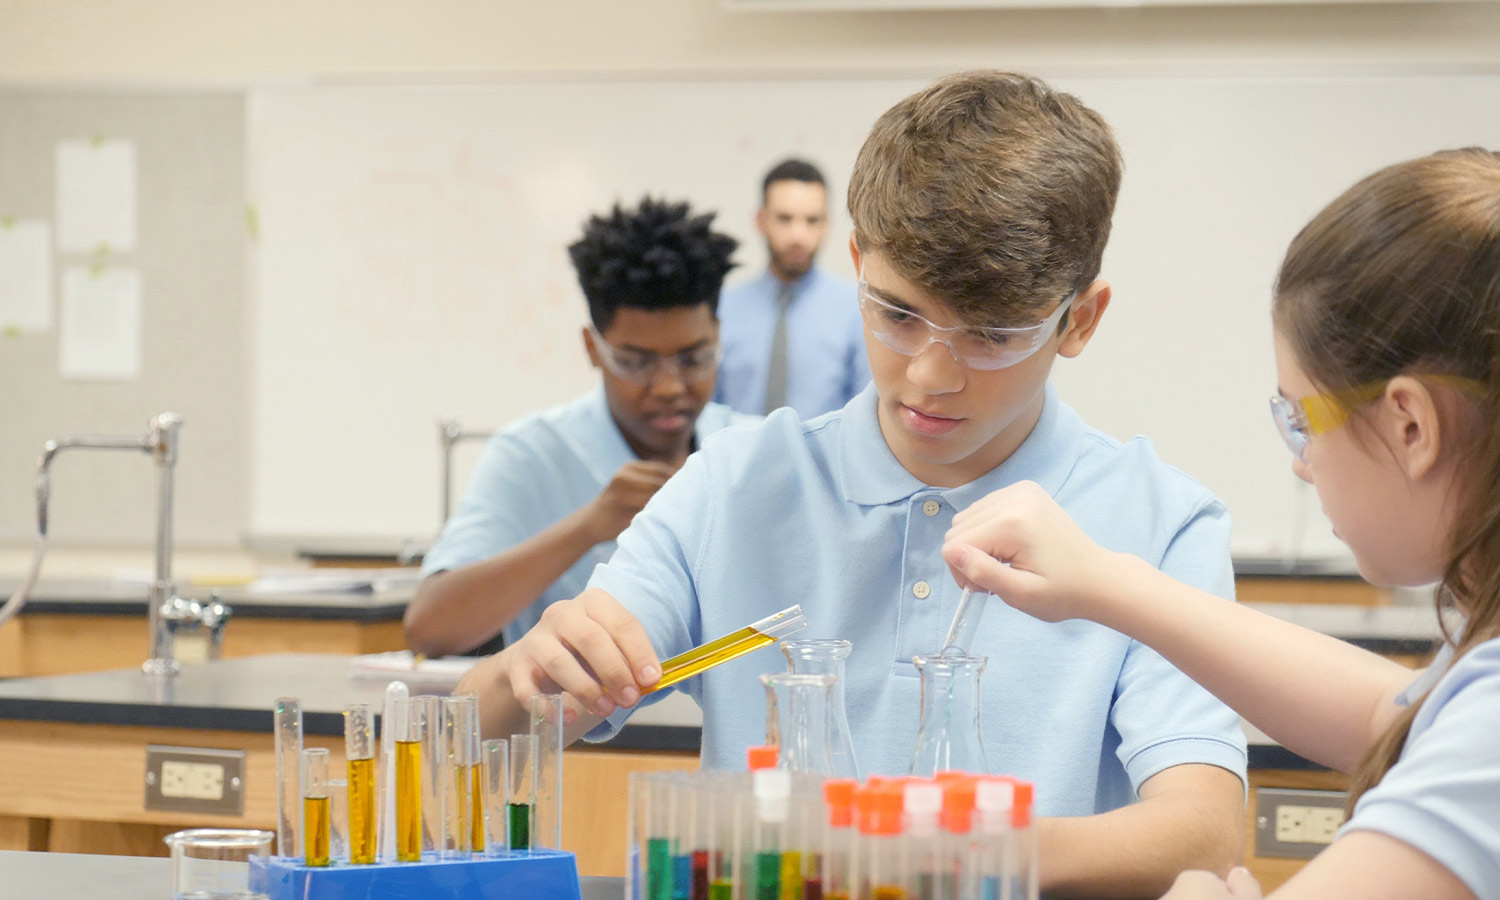 secondary school aged kids pour liquids into scientific flasks in a lab classroom